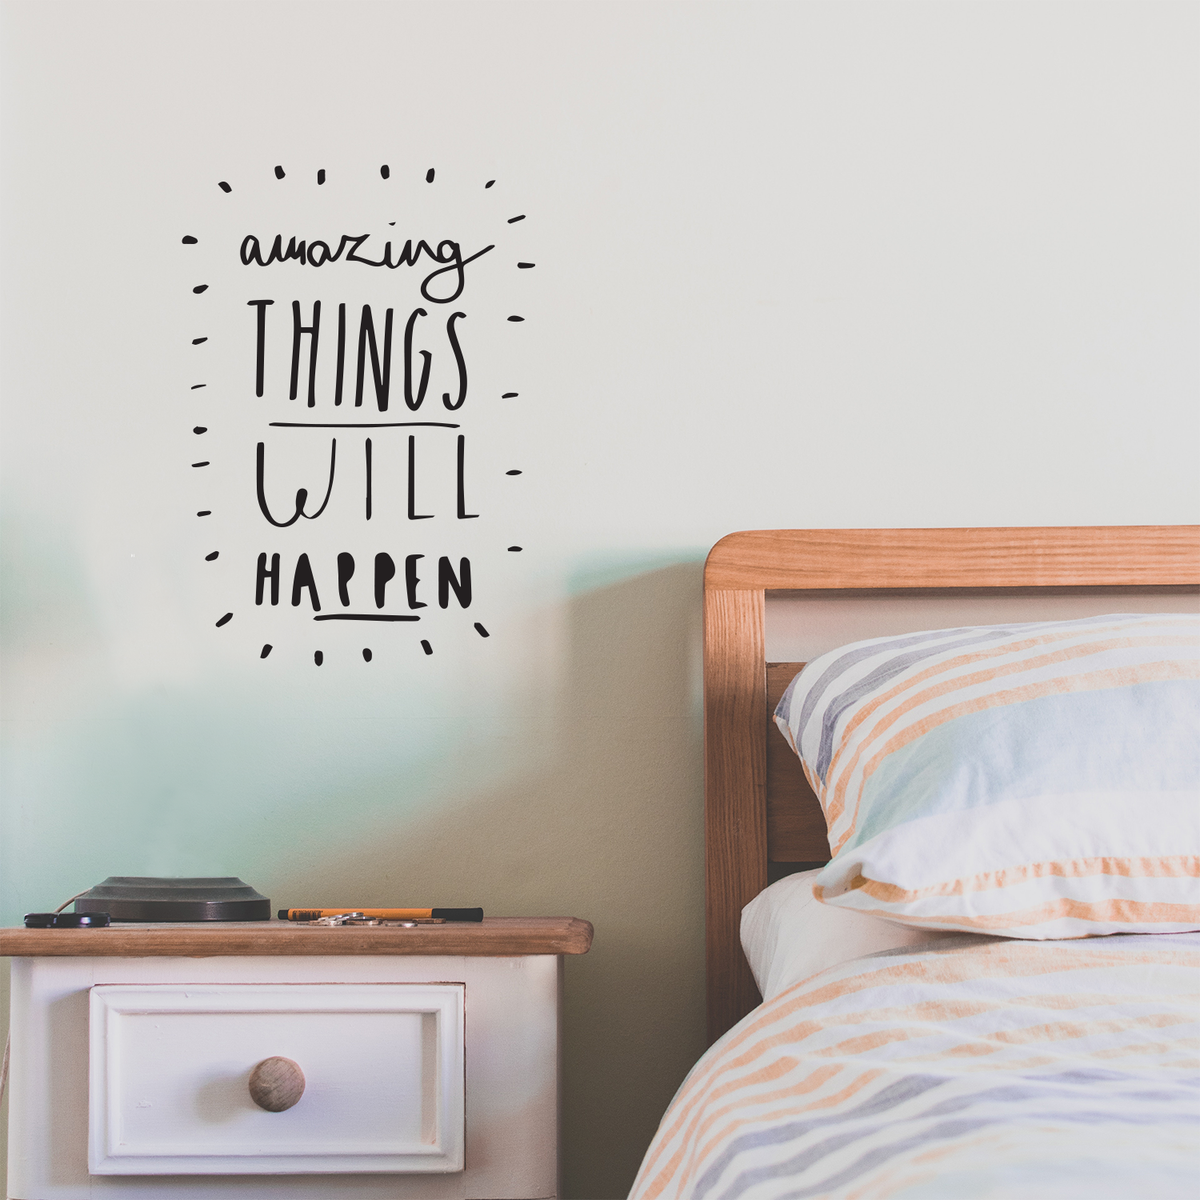 Make Things Happen Motivational Quote - Wall Art Decal - 18 x 21